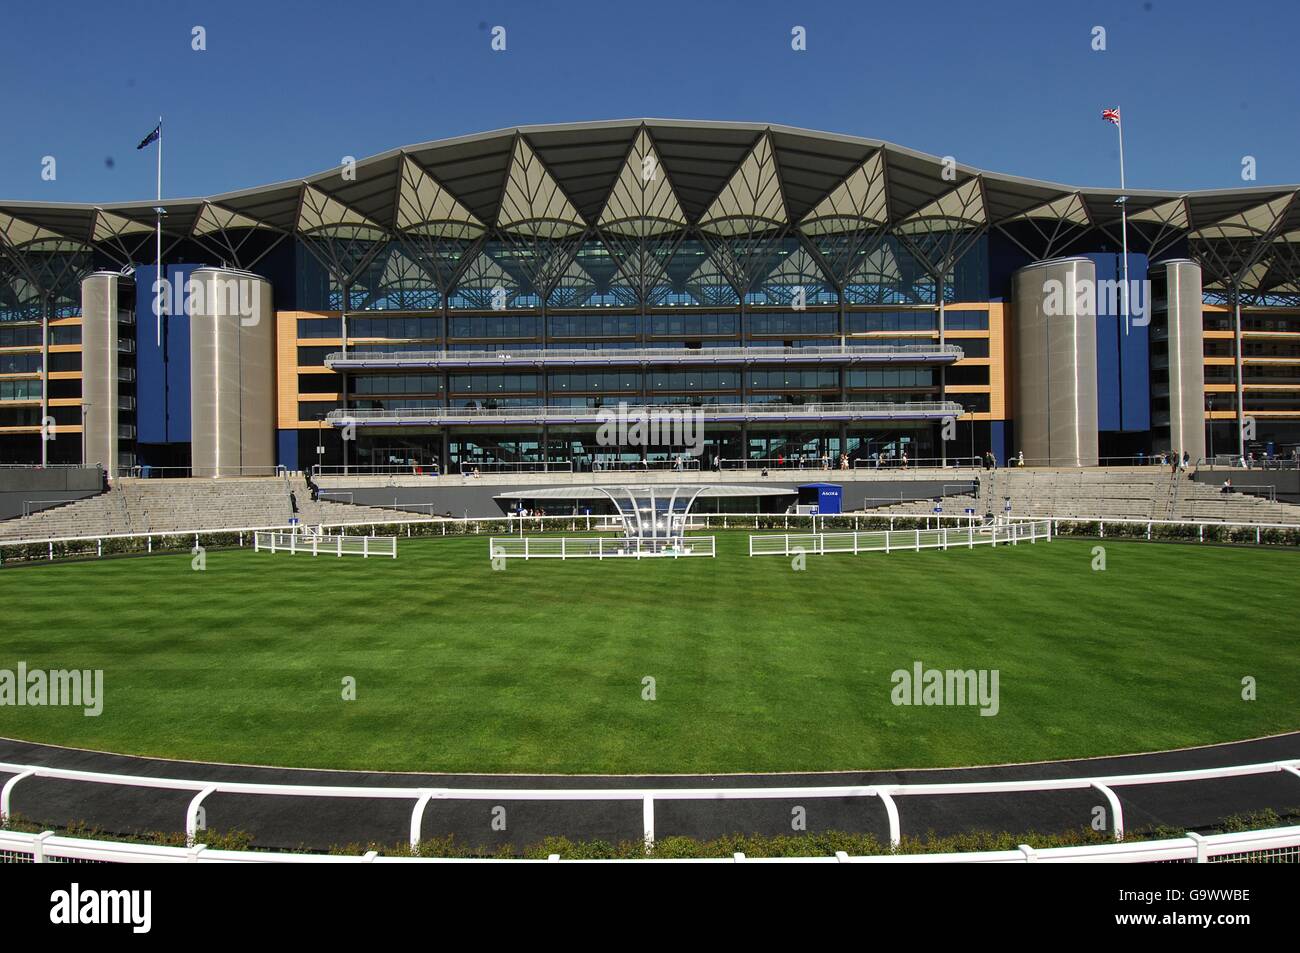 Horse Racing - Day of the Third Age Meeting - Ascot Racecourse Stock Photo